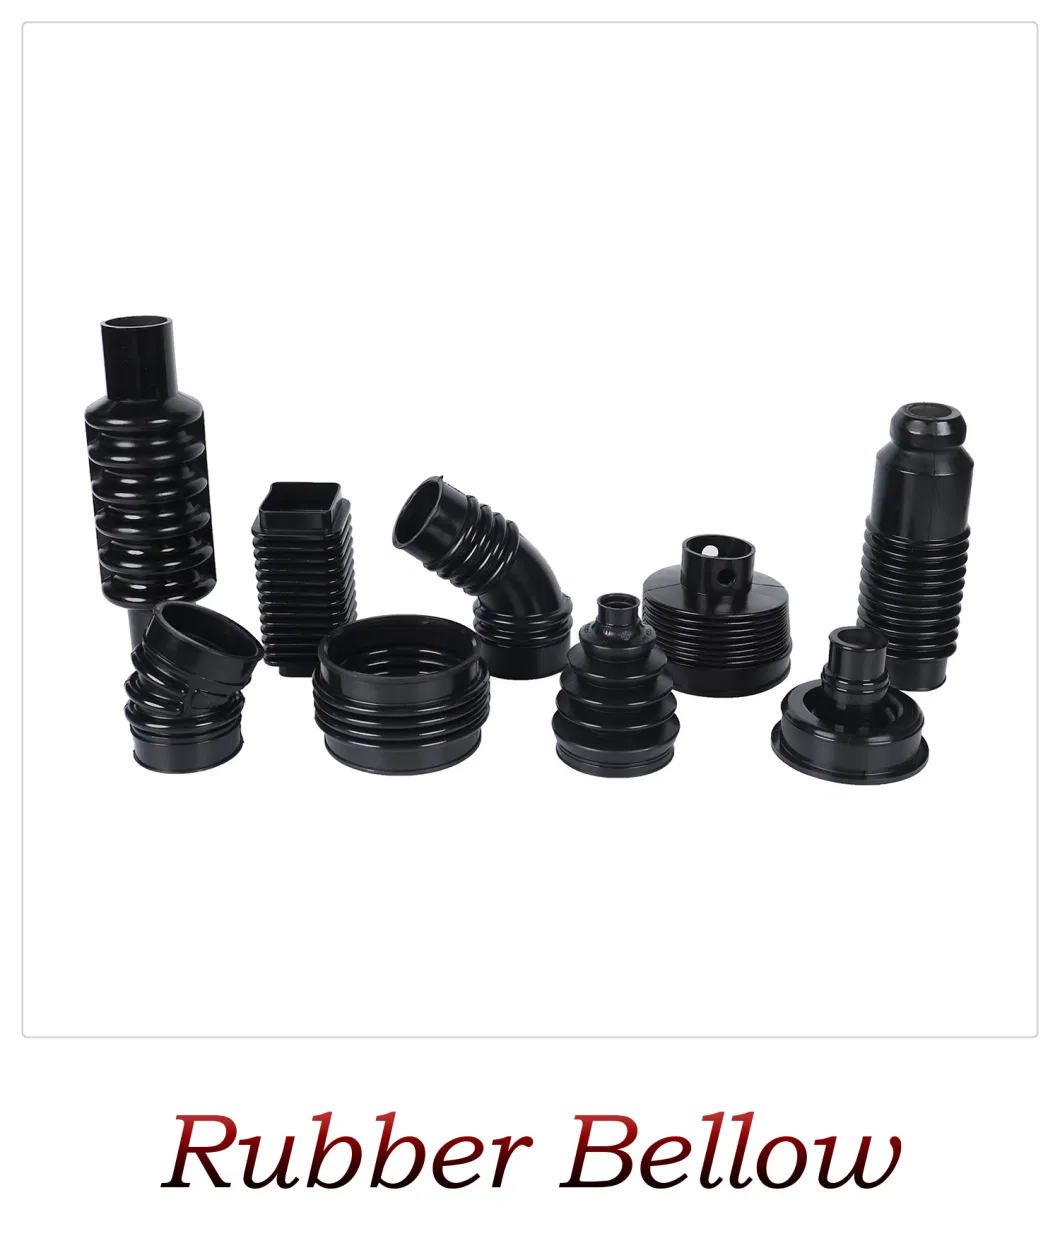 Oil Proof and High Temperature Resistance EPDM/NBR/FKM/CR Rubber Shock Absorber for Automotive for Motorcycle